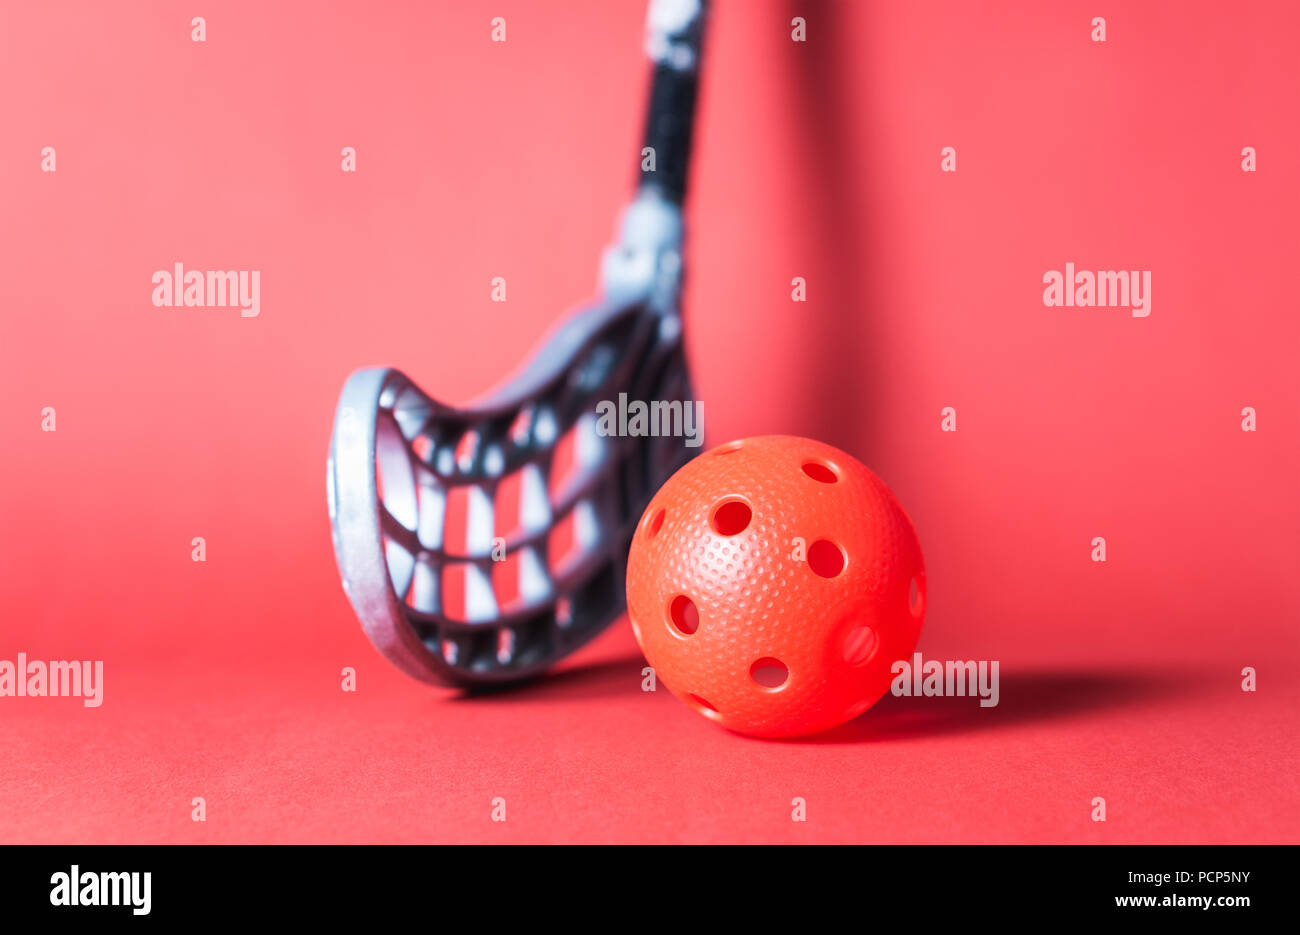 Floorball stick and ball against red background. Floor hockey concept. Stock Photo